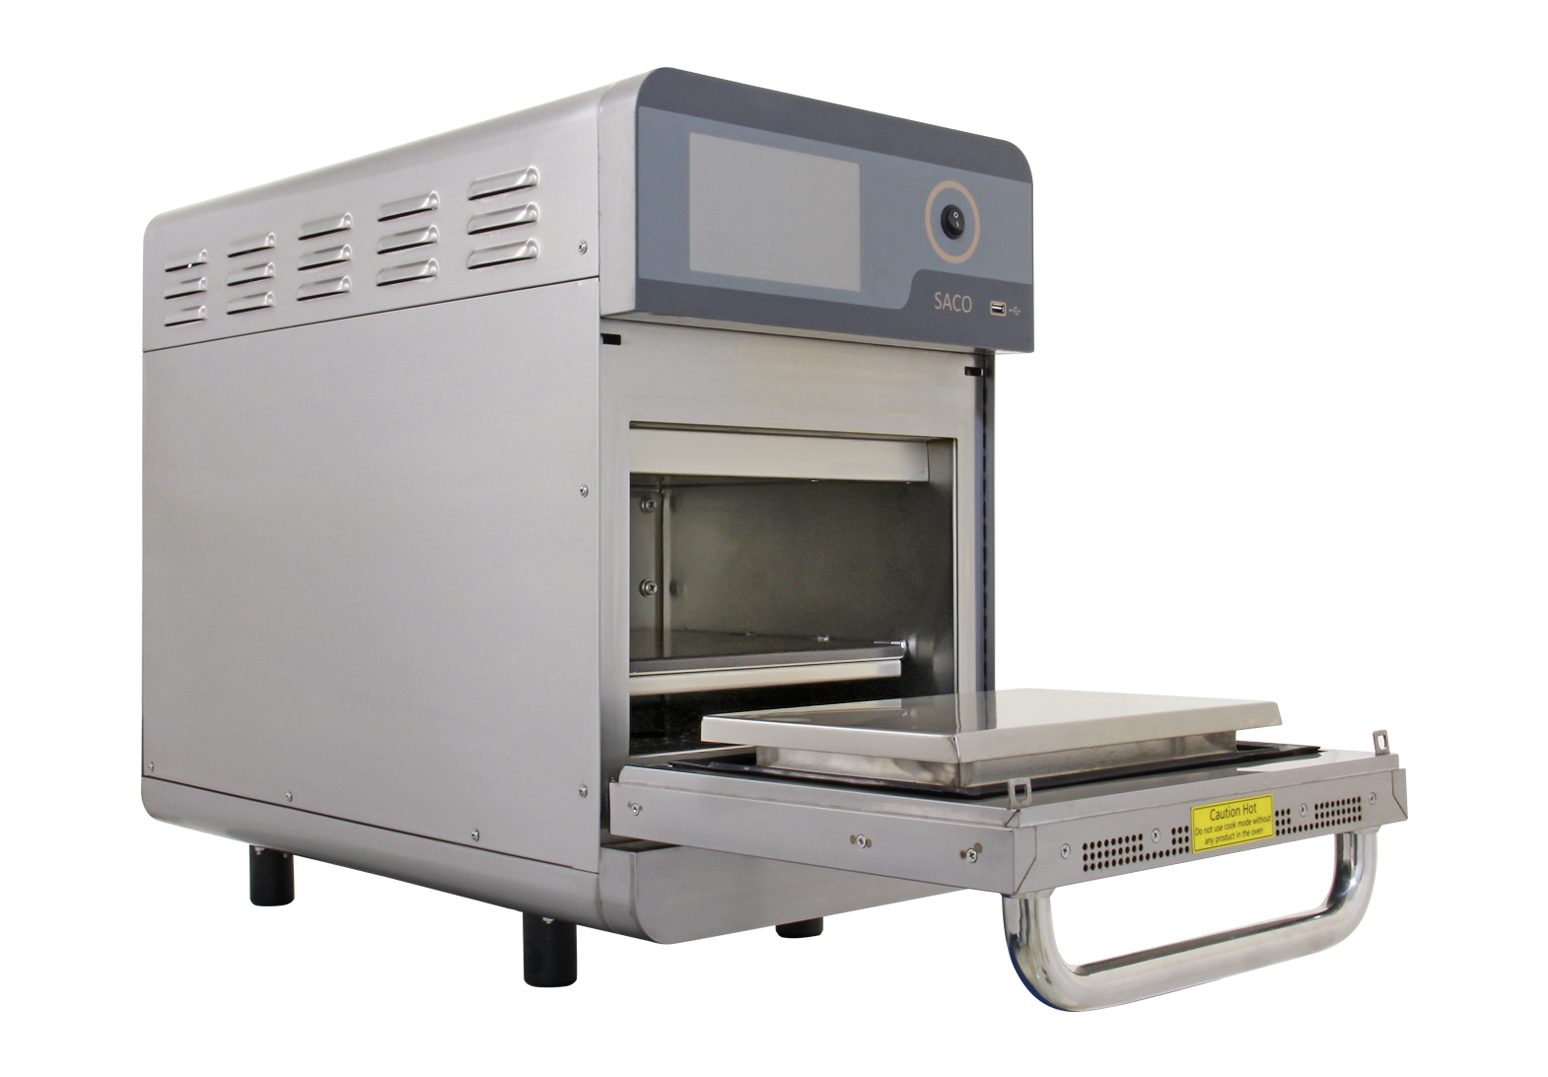 SACO V1 Model High-speed Accelerated Countertop Ventless Cooking Oven